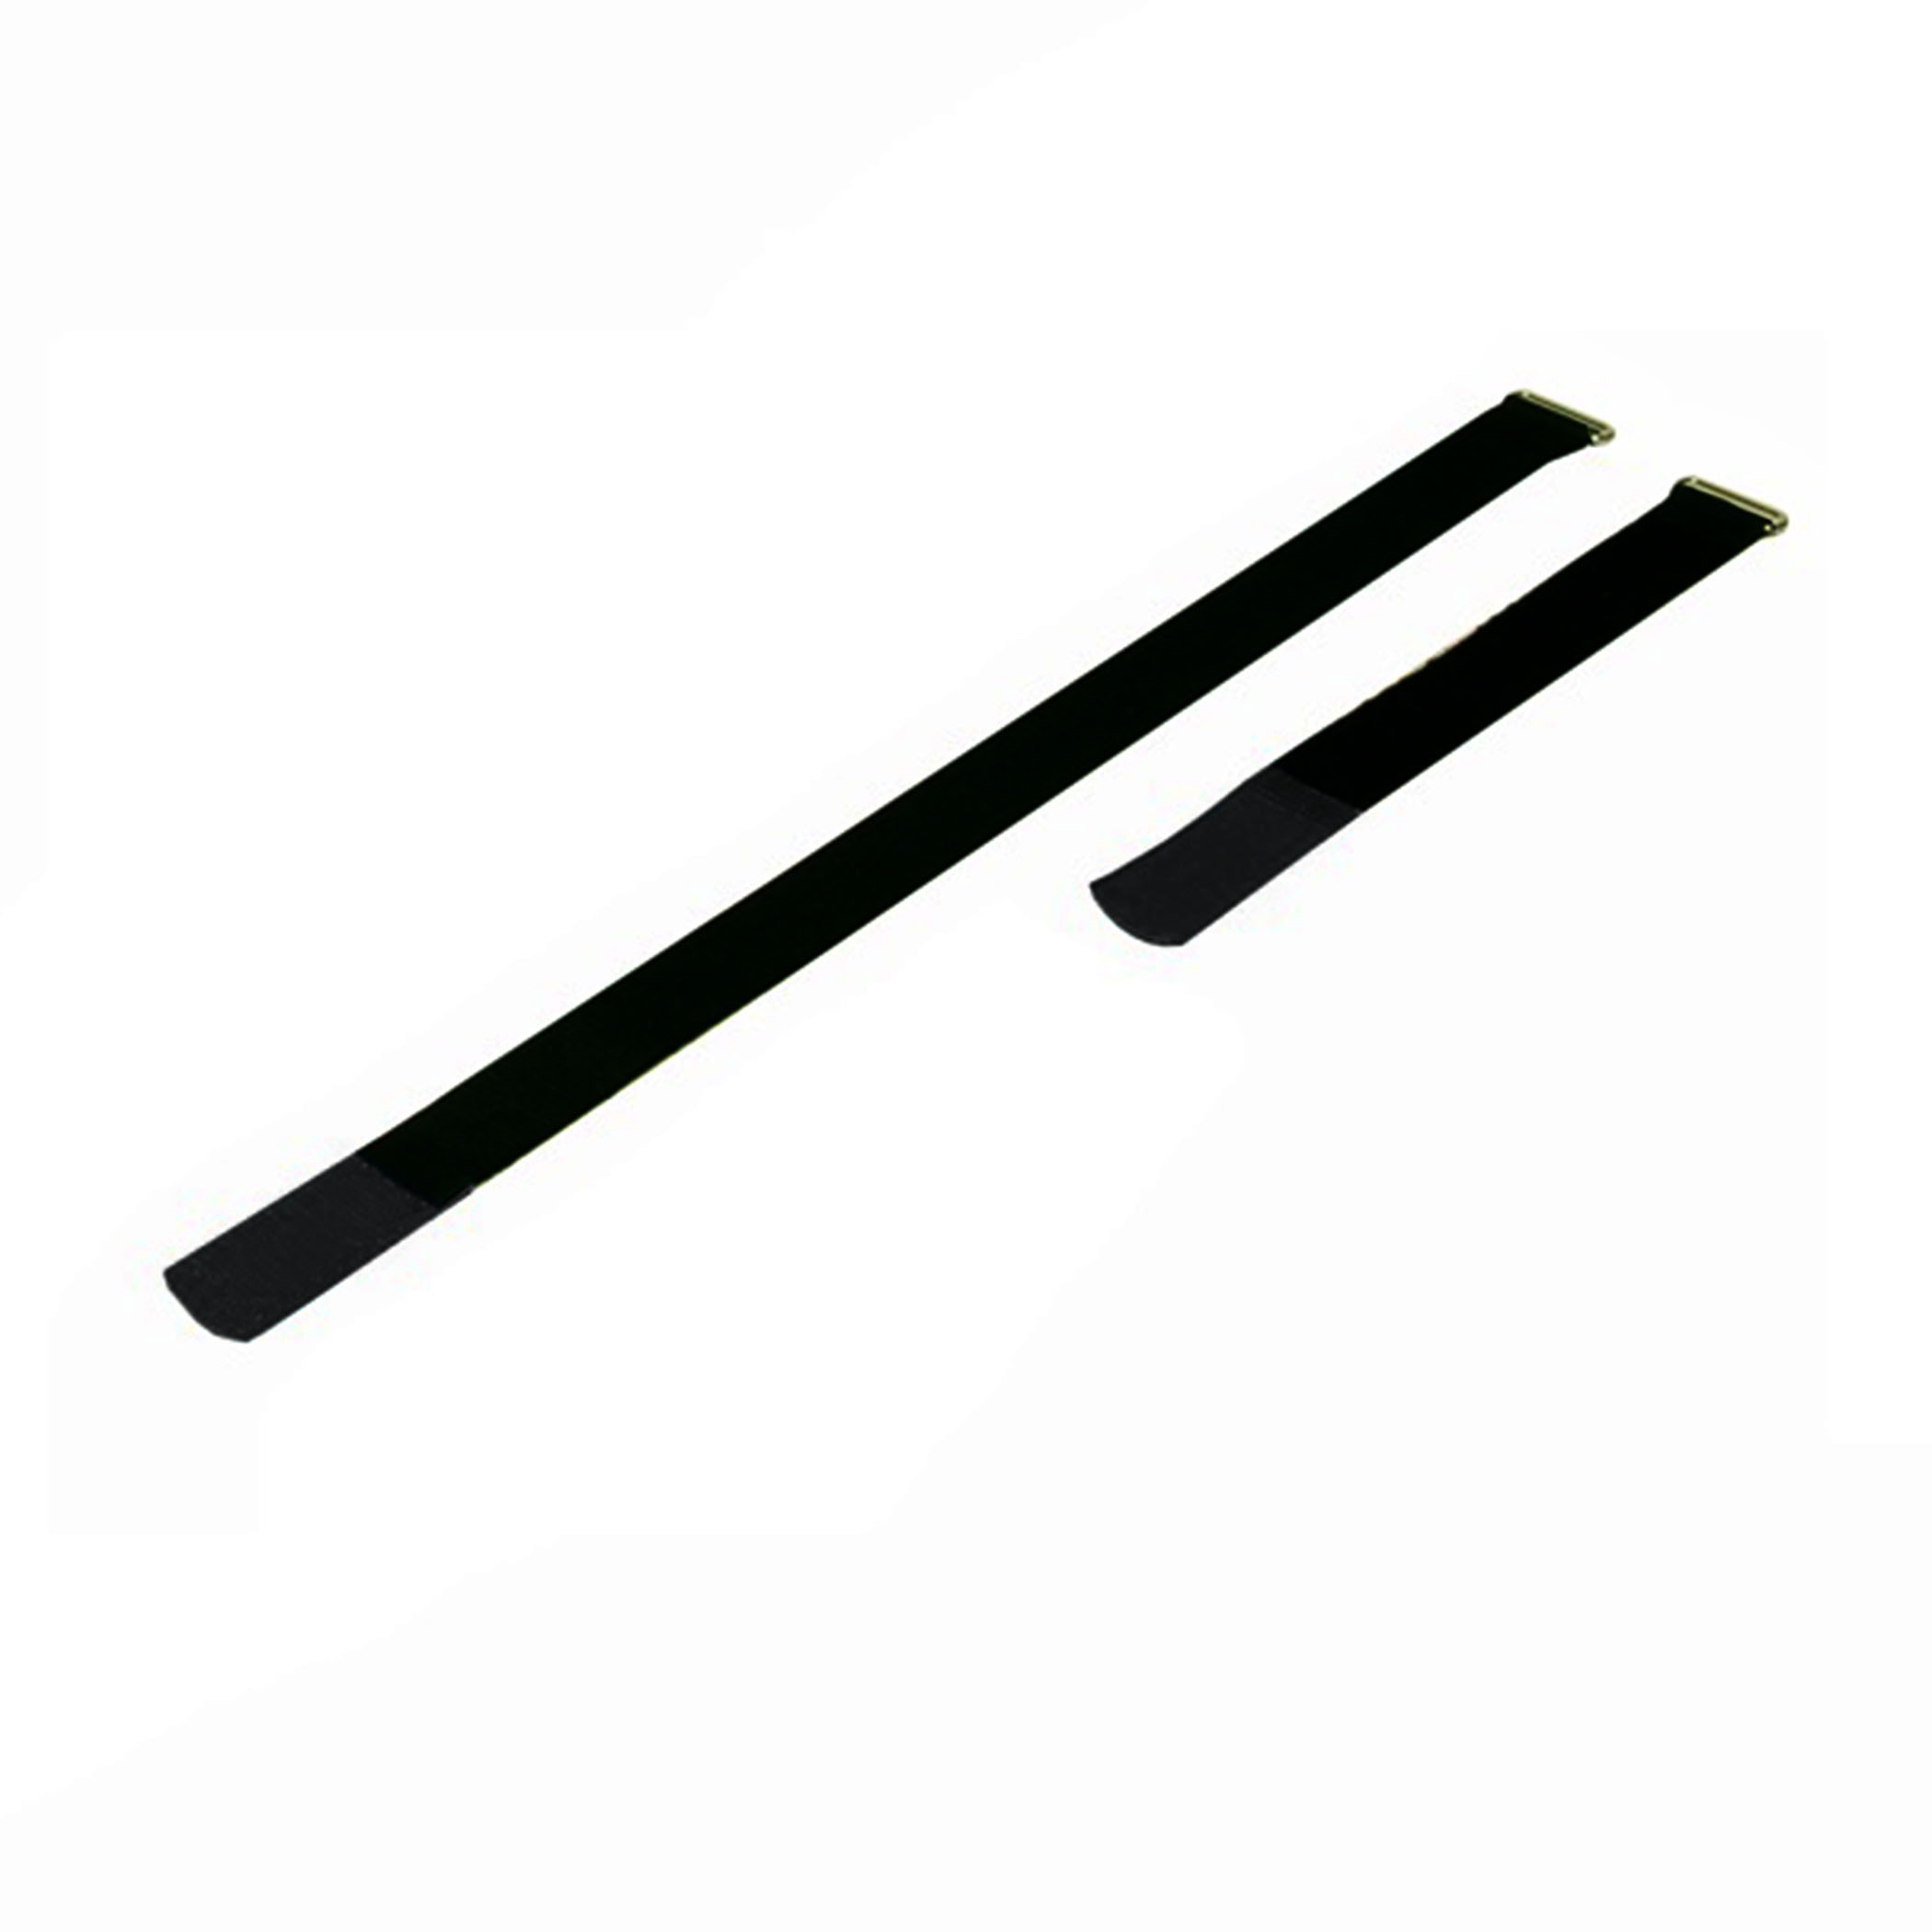 Cable Tie 410x25mm with Hook Black, (10 pieces) - a2541-500h